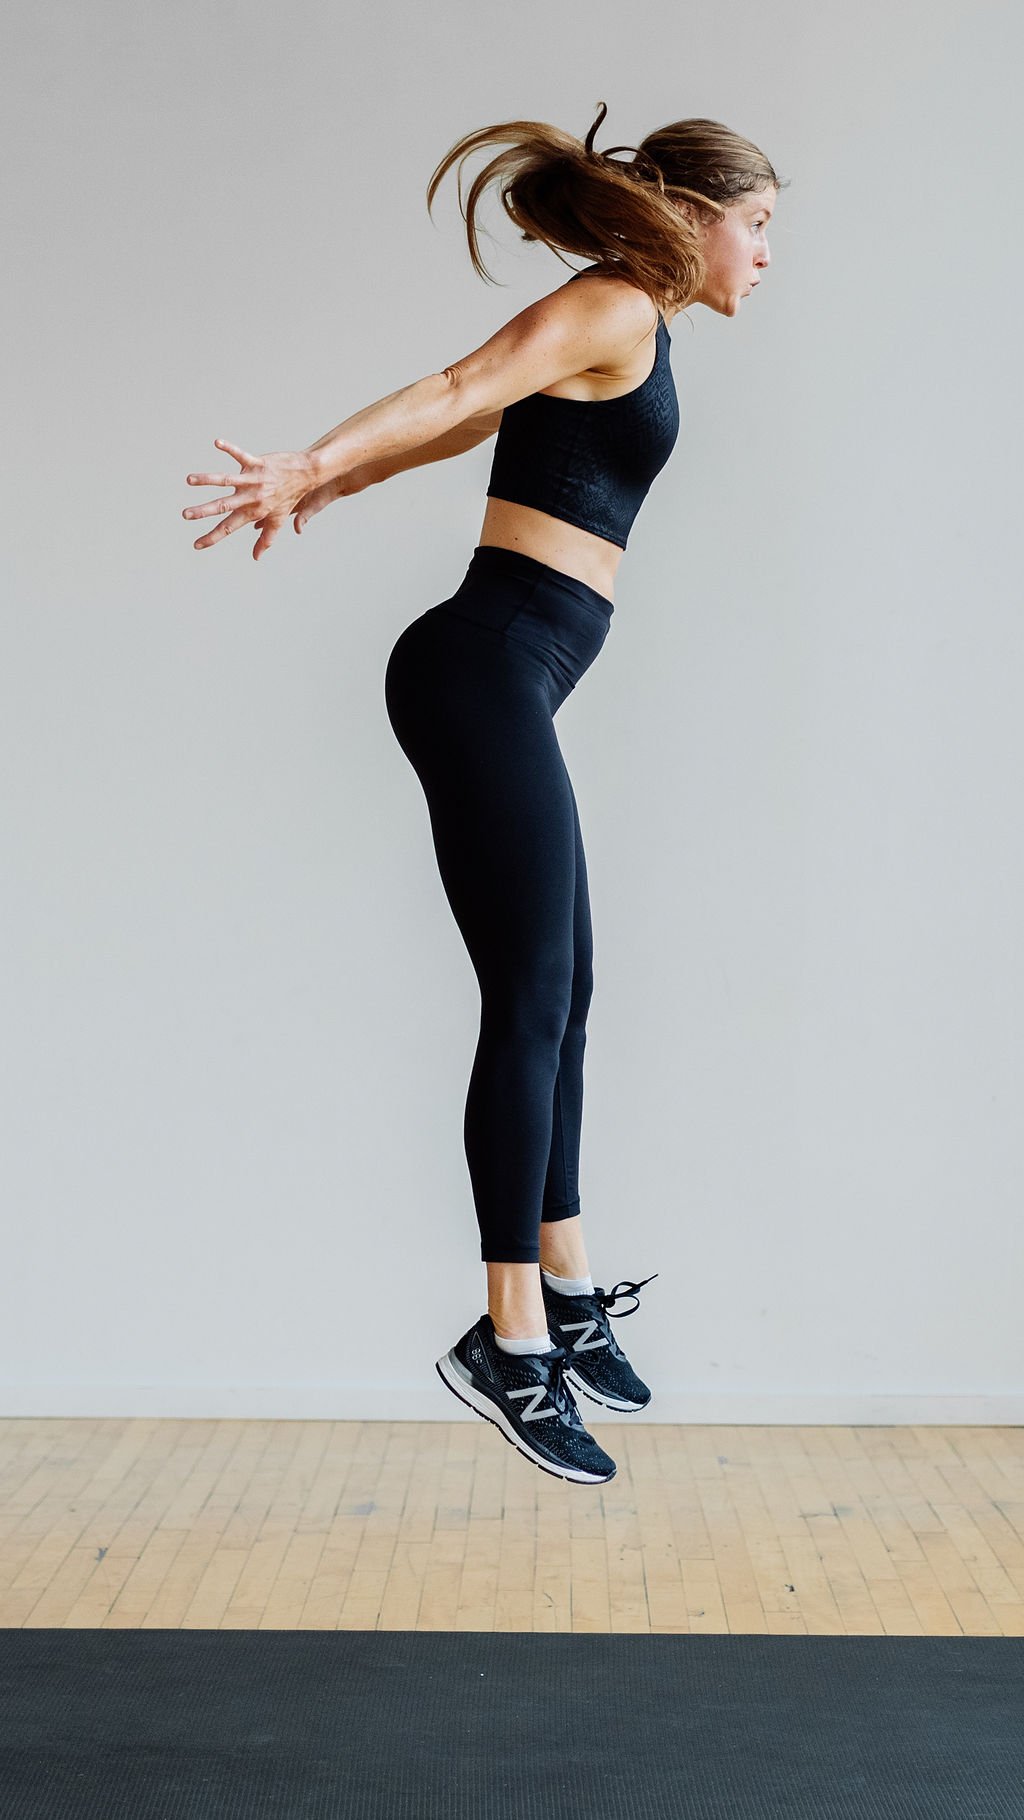 This HIIT Leg Workout Will Double as Your Cardio! - Nourish, Move